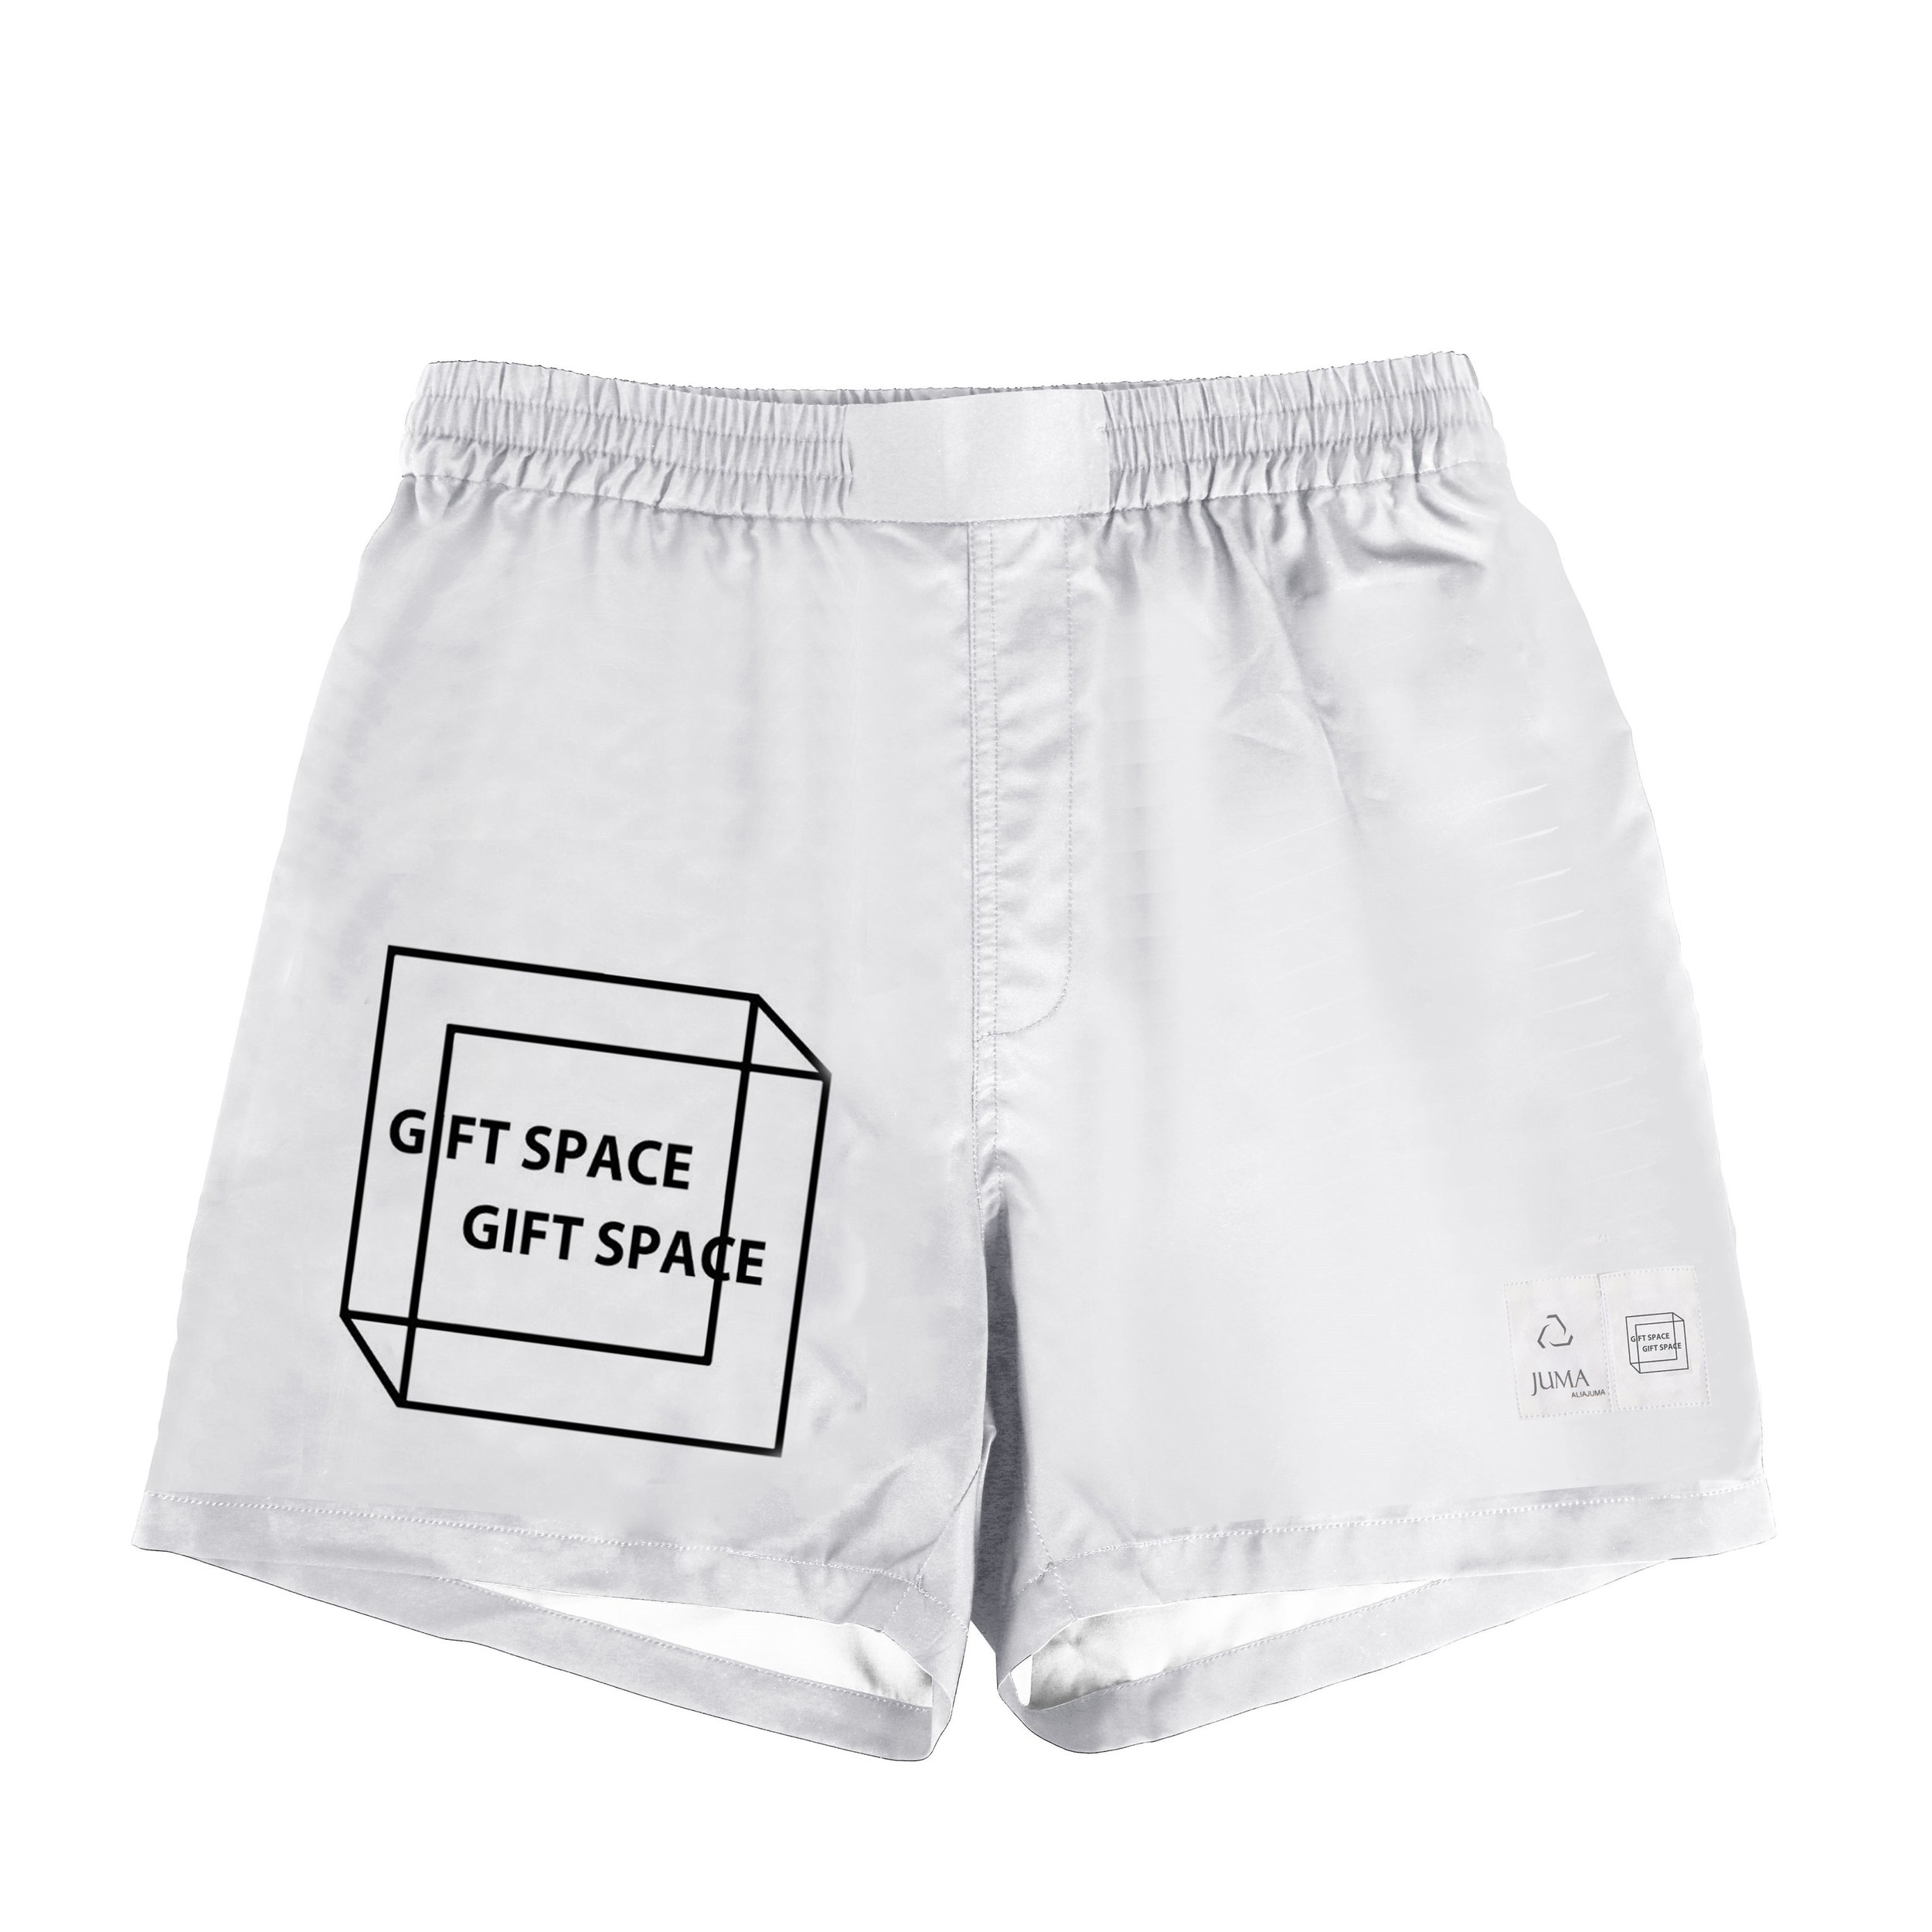 Gift Space 拳击短裤 - 4 个回收水瓶 - 白色｜Gift Space Printed Boxer Shorts - 4 Recycled Water Bottles - White